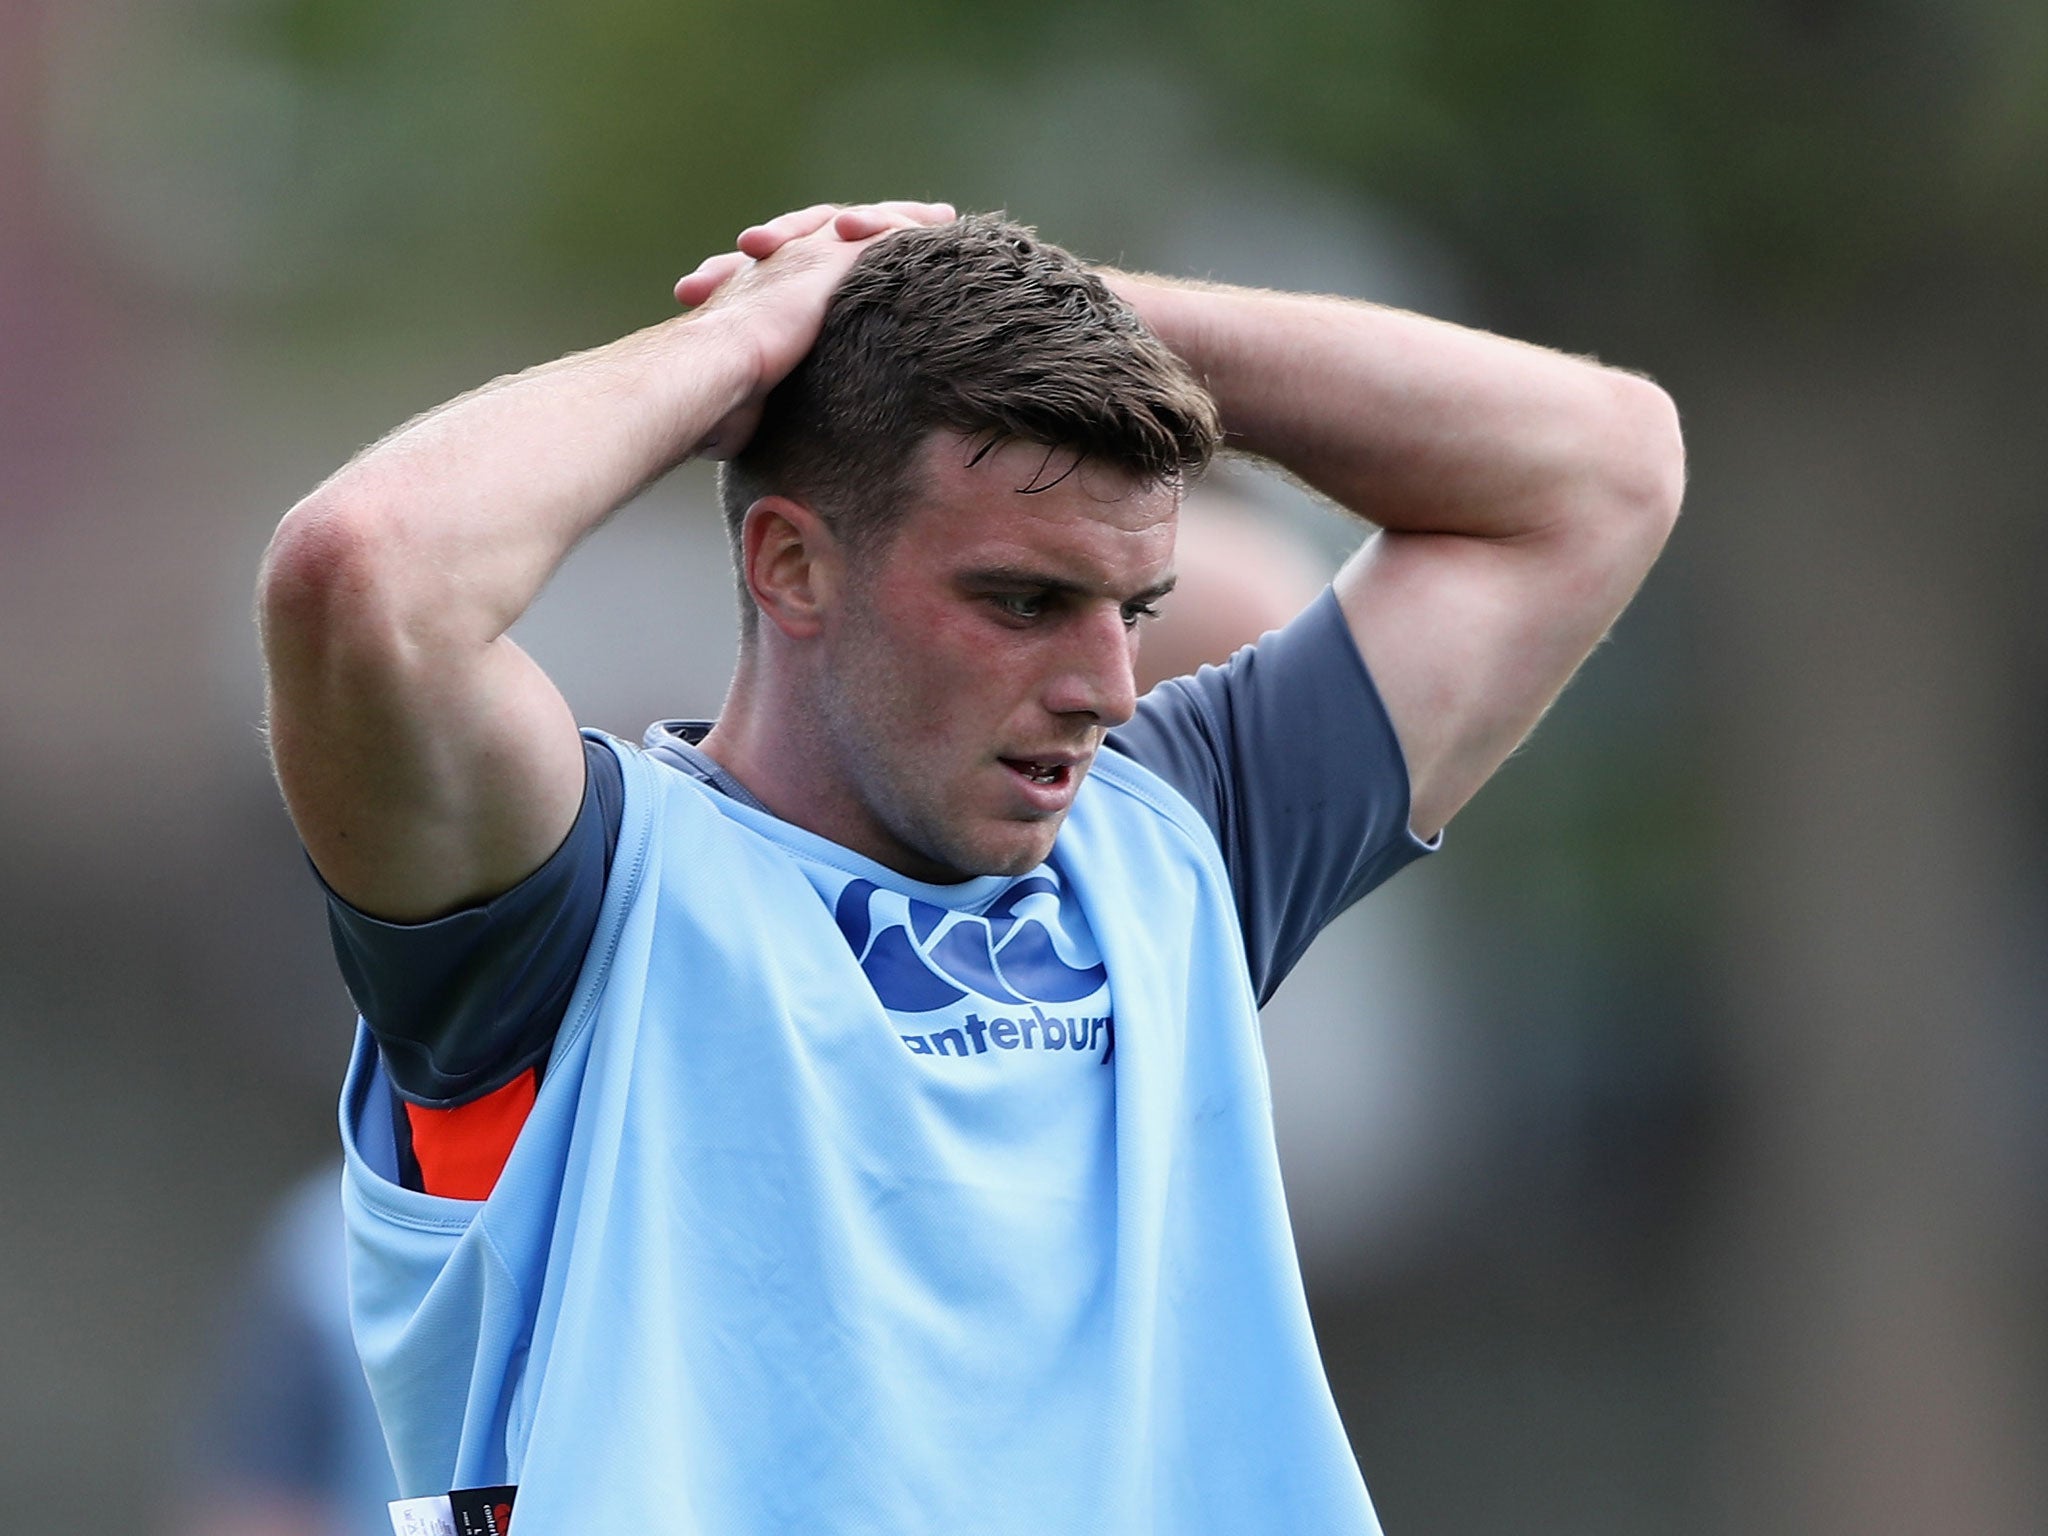 George Ford will be one of England's most experienced players in Argentina despite being 24 years old